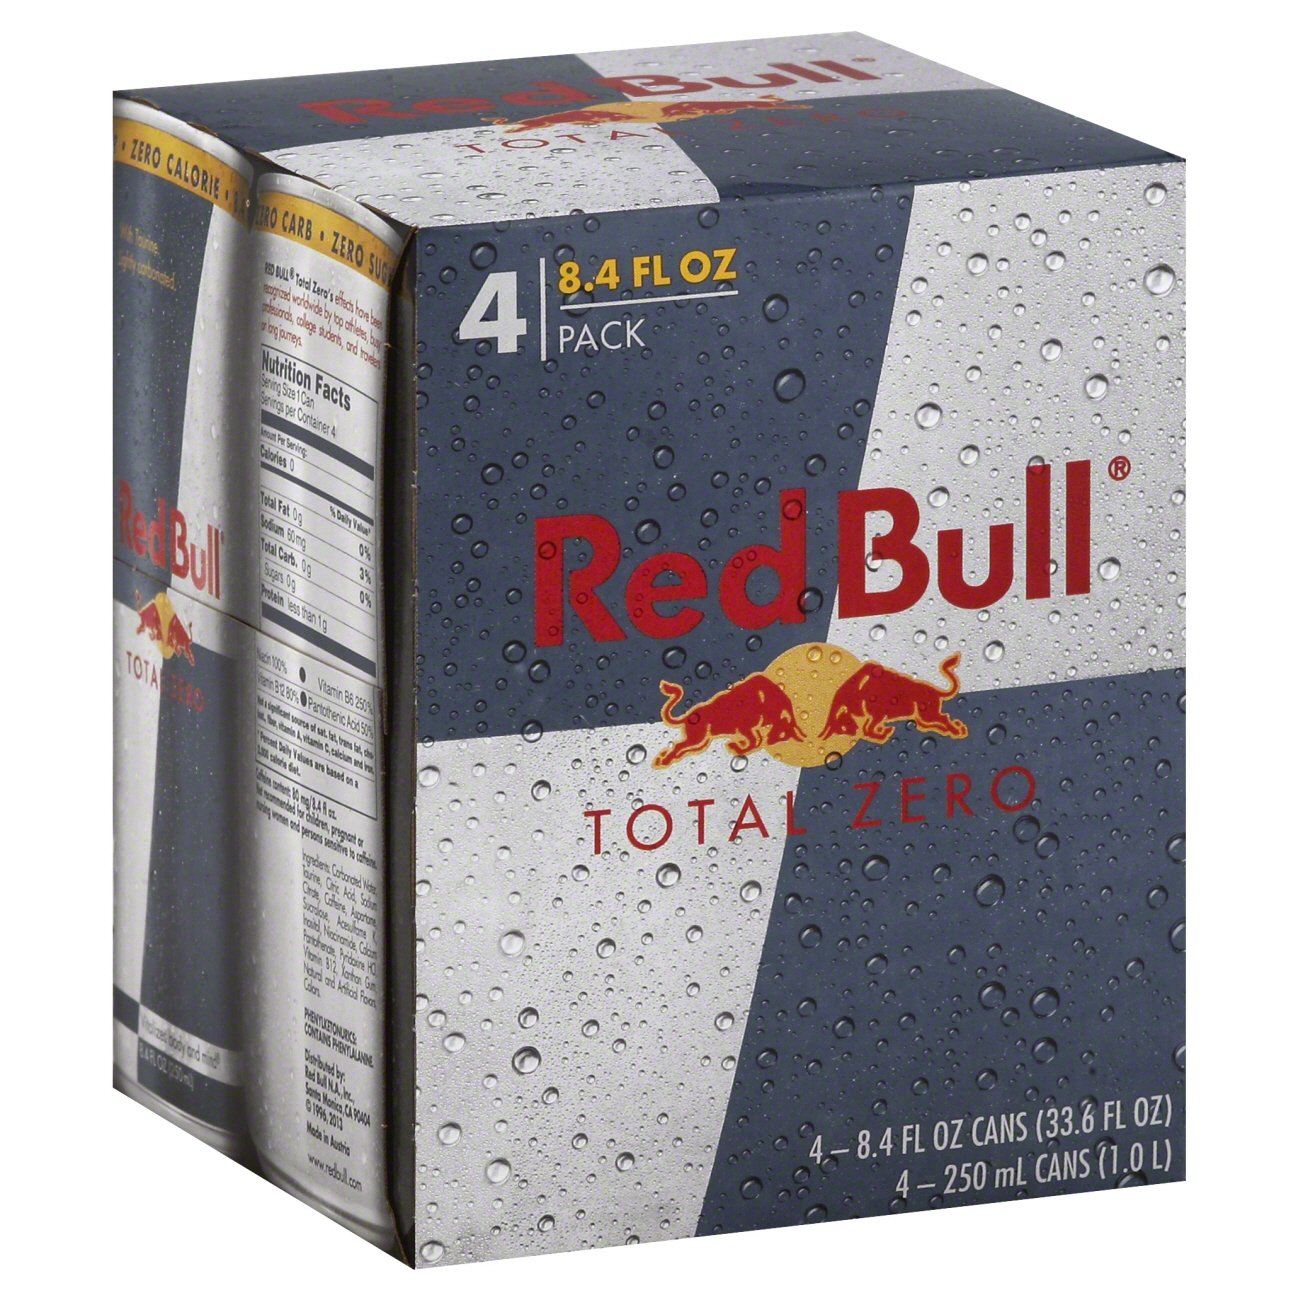 Red Bull Total Zero Energy Drink 8.4 oz Cans - Shop Sports ...